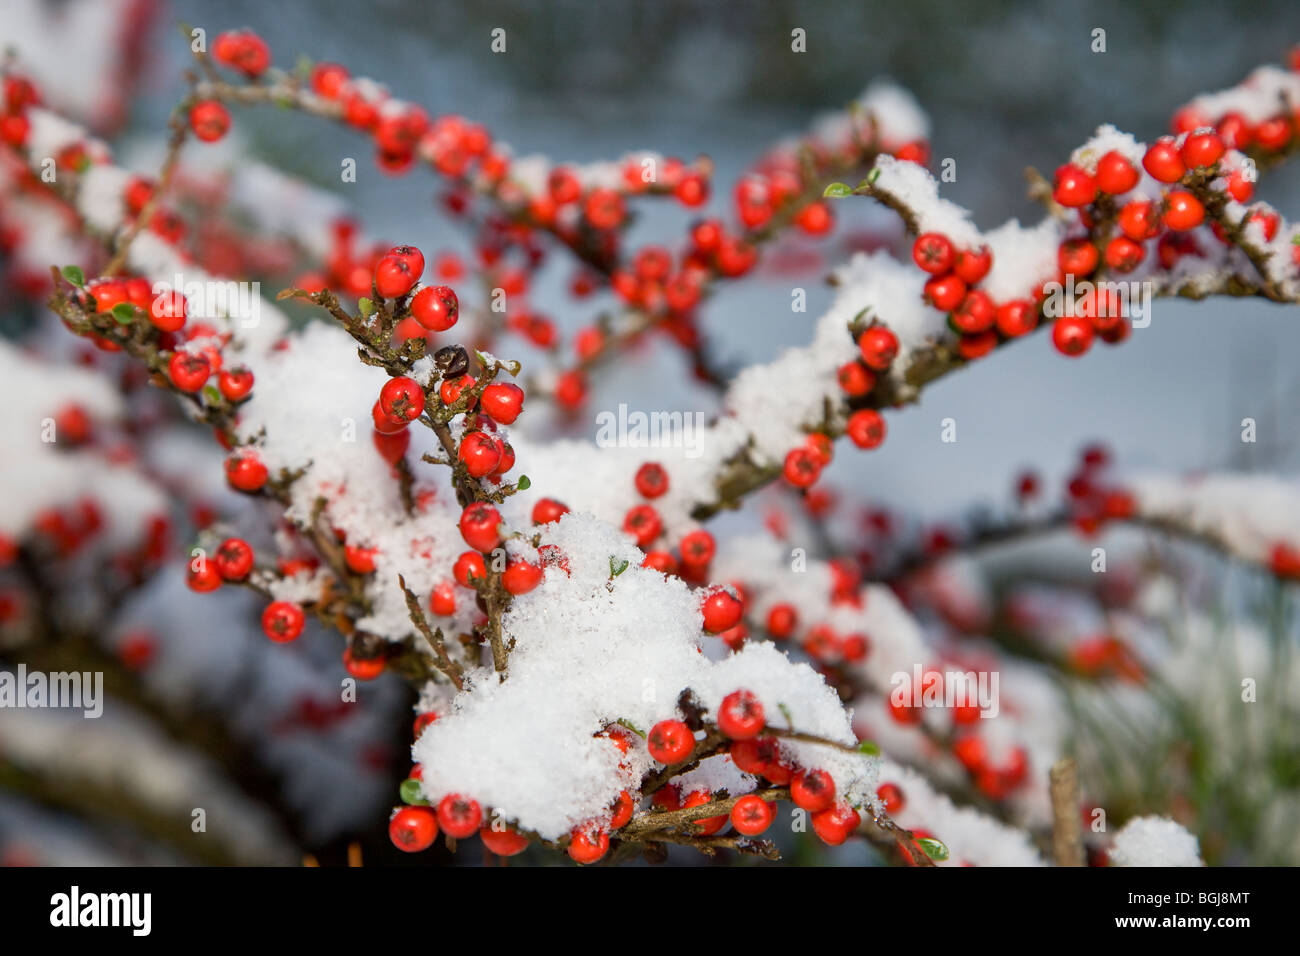 Cotoneaster berries covered in snow Stock Photo